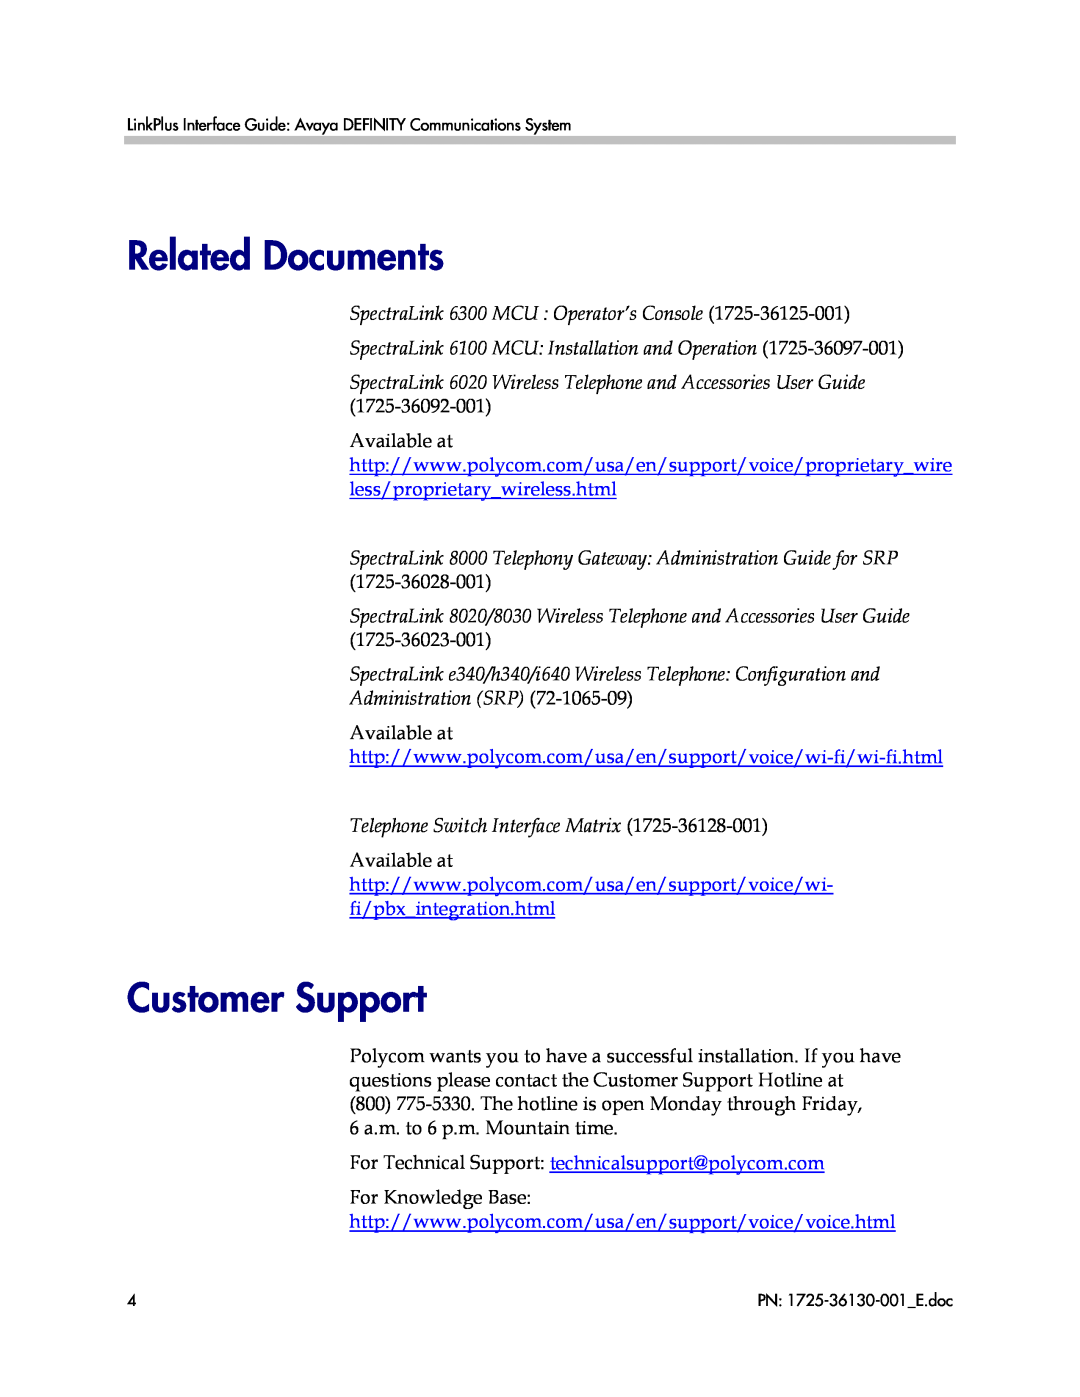 Polycom 1725-361300-001, SPECTRALINK 8000 manual Related Documents, Customer Support, Available at, For Knowledge Base 